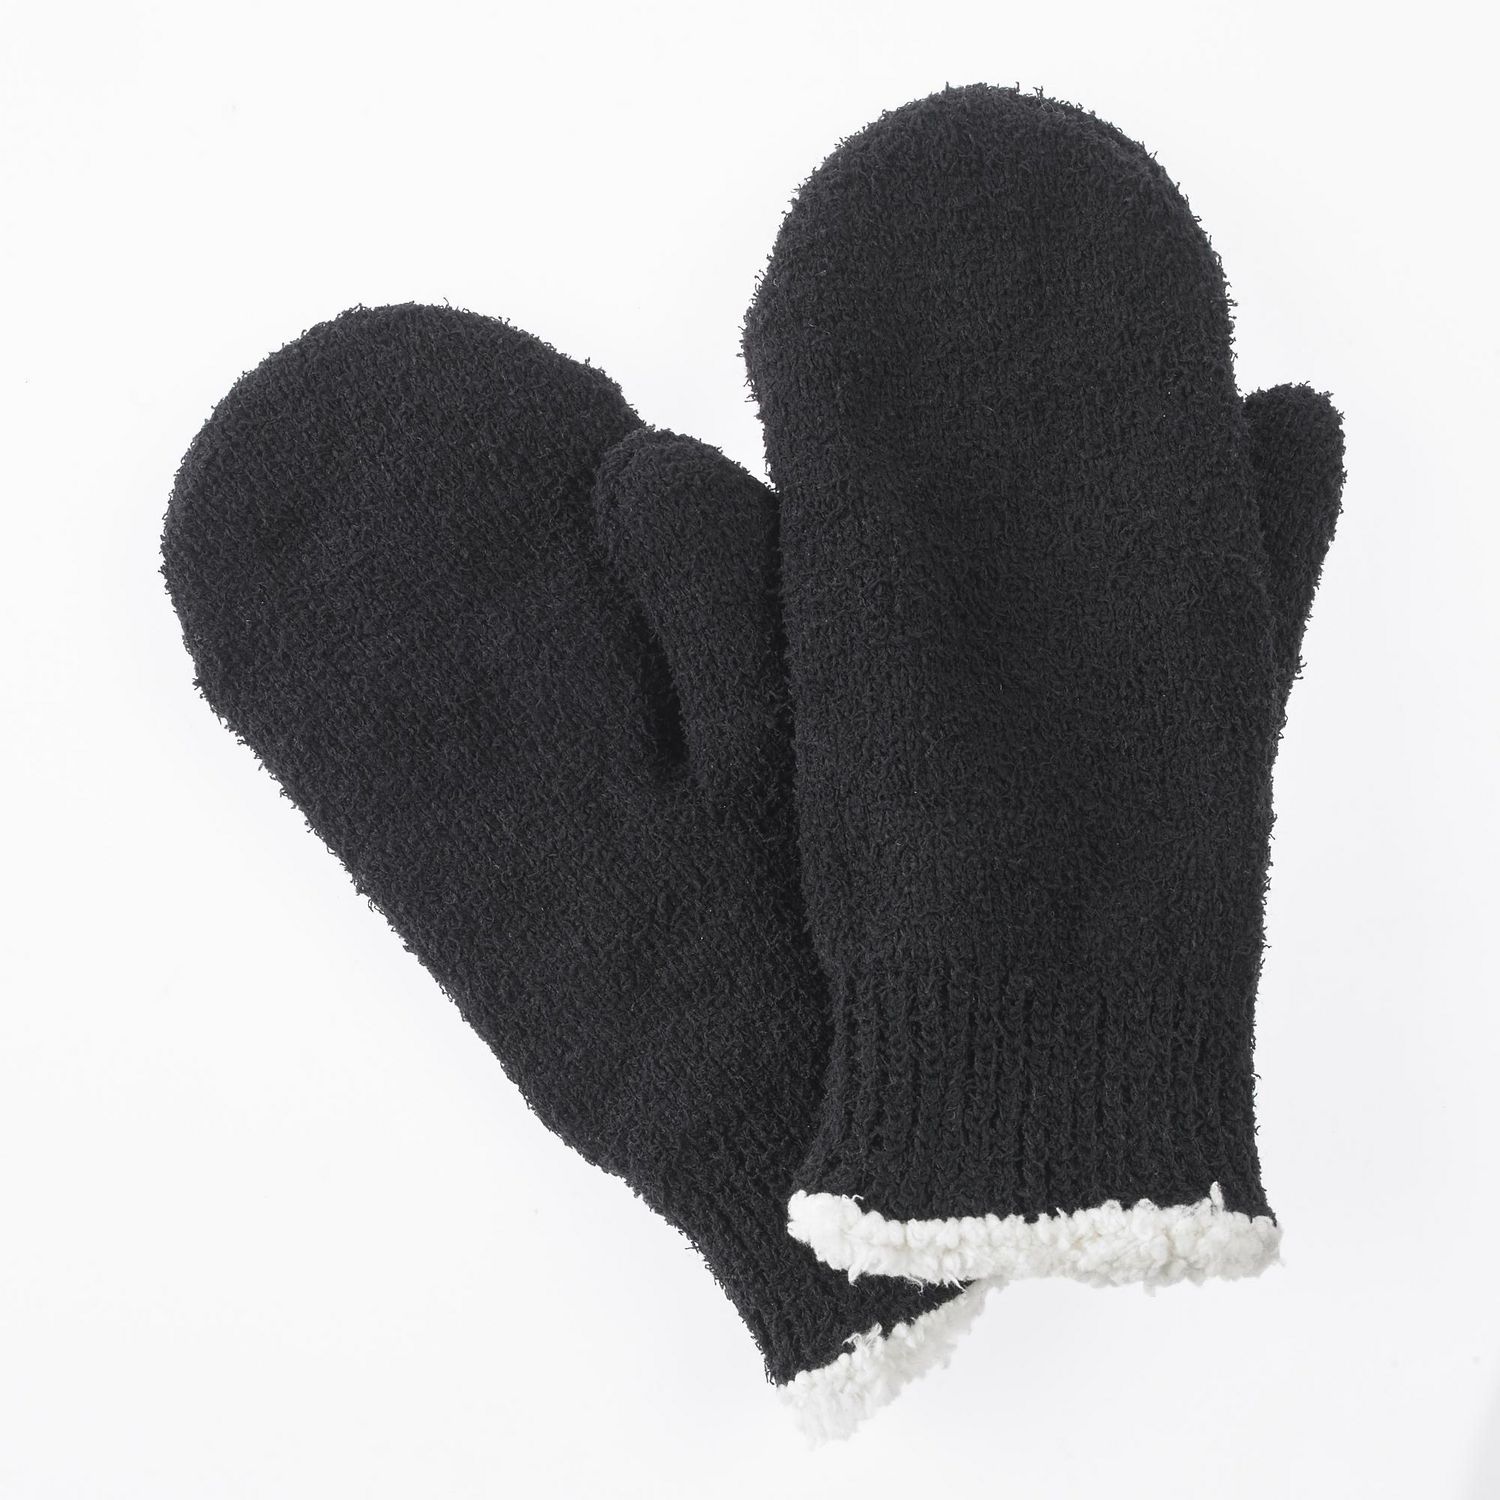 ISOfit by isotoner® ISO88 Women's Black Knit Mittens | Walmart Canada